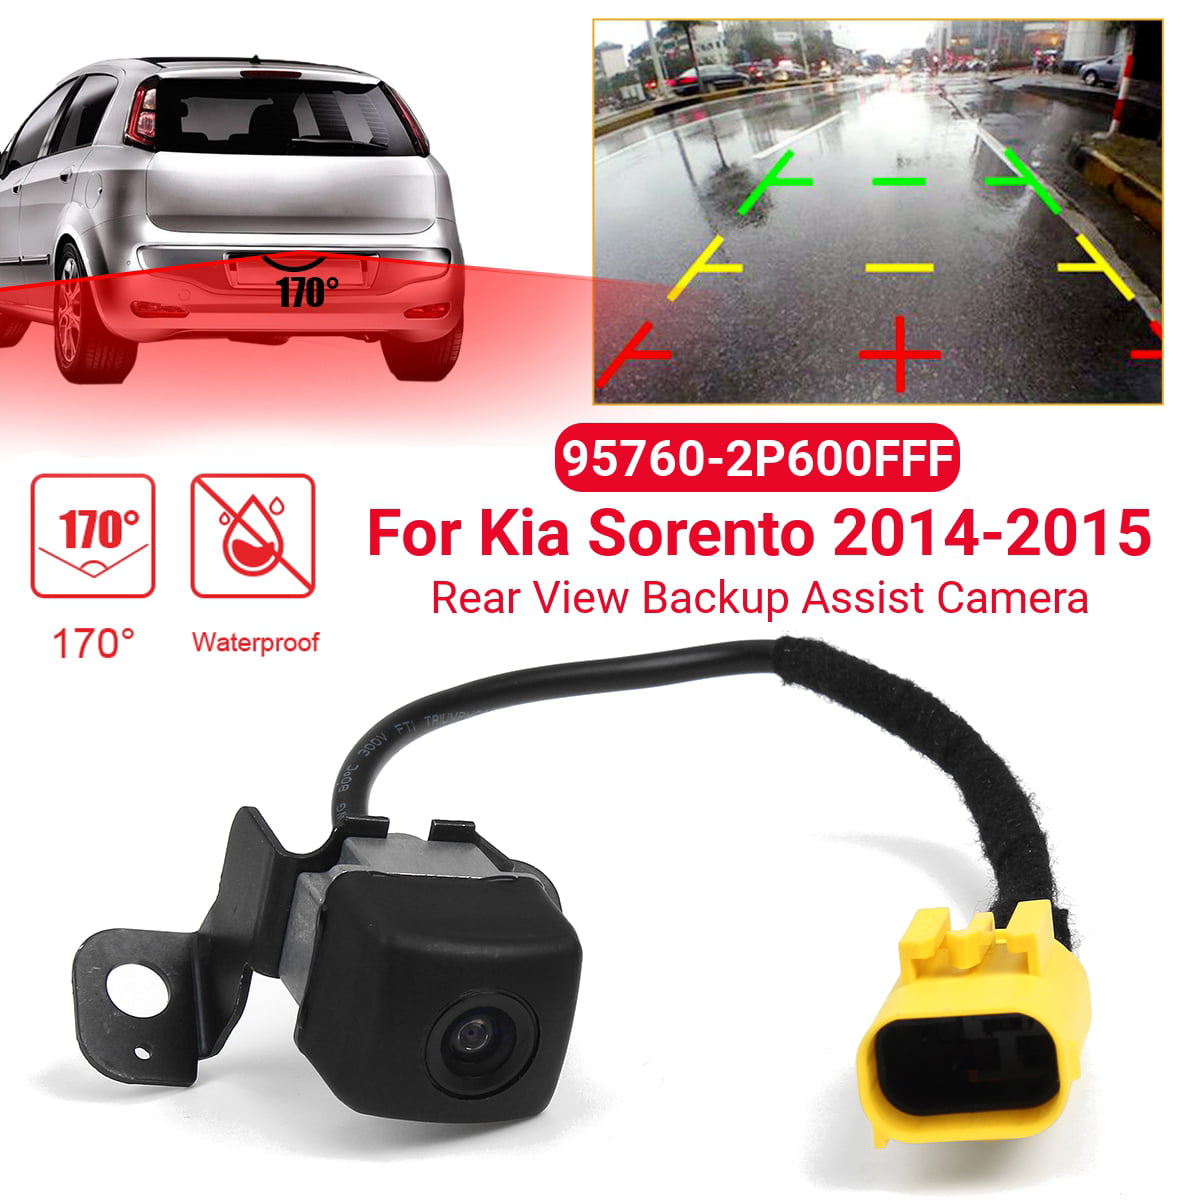 Dasbecan Rear View Back Up Assist Camera Compatible with Kia Sorento 2014 2015 Replaces# 95760-2P600 95760-2P600FFF 